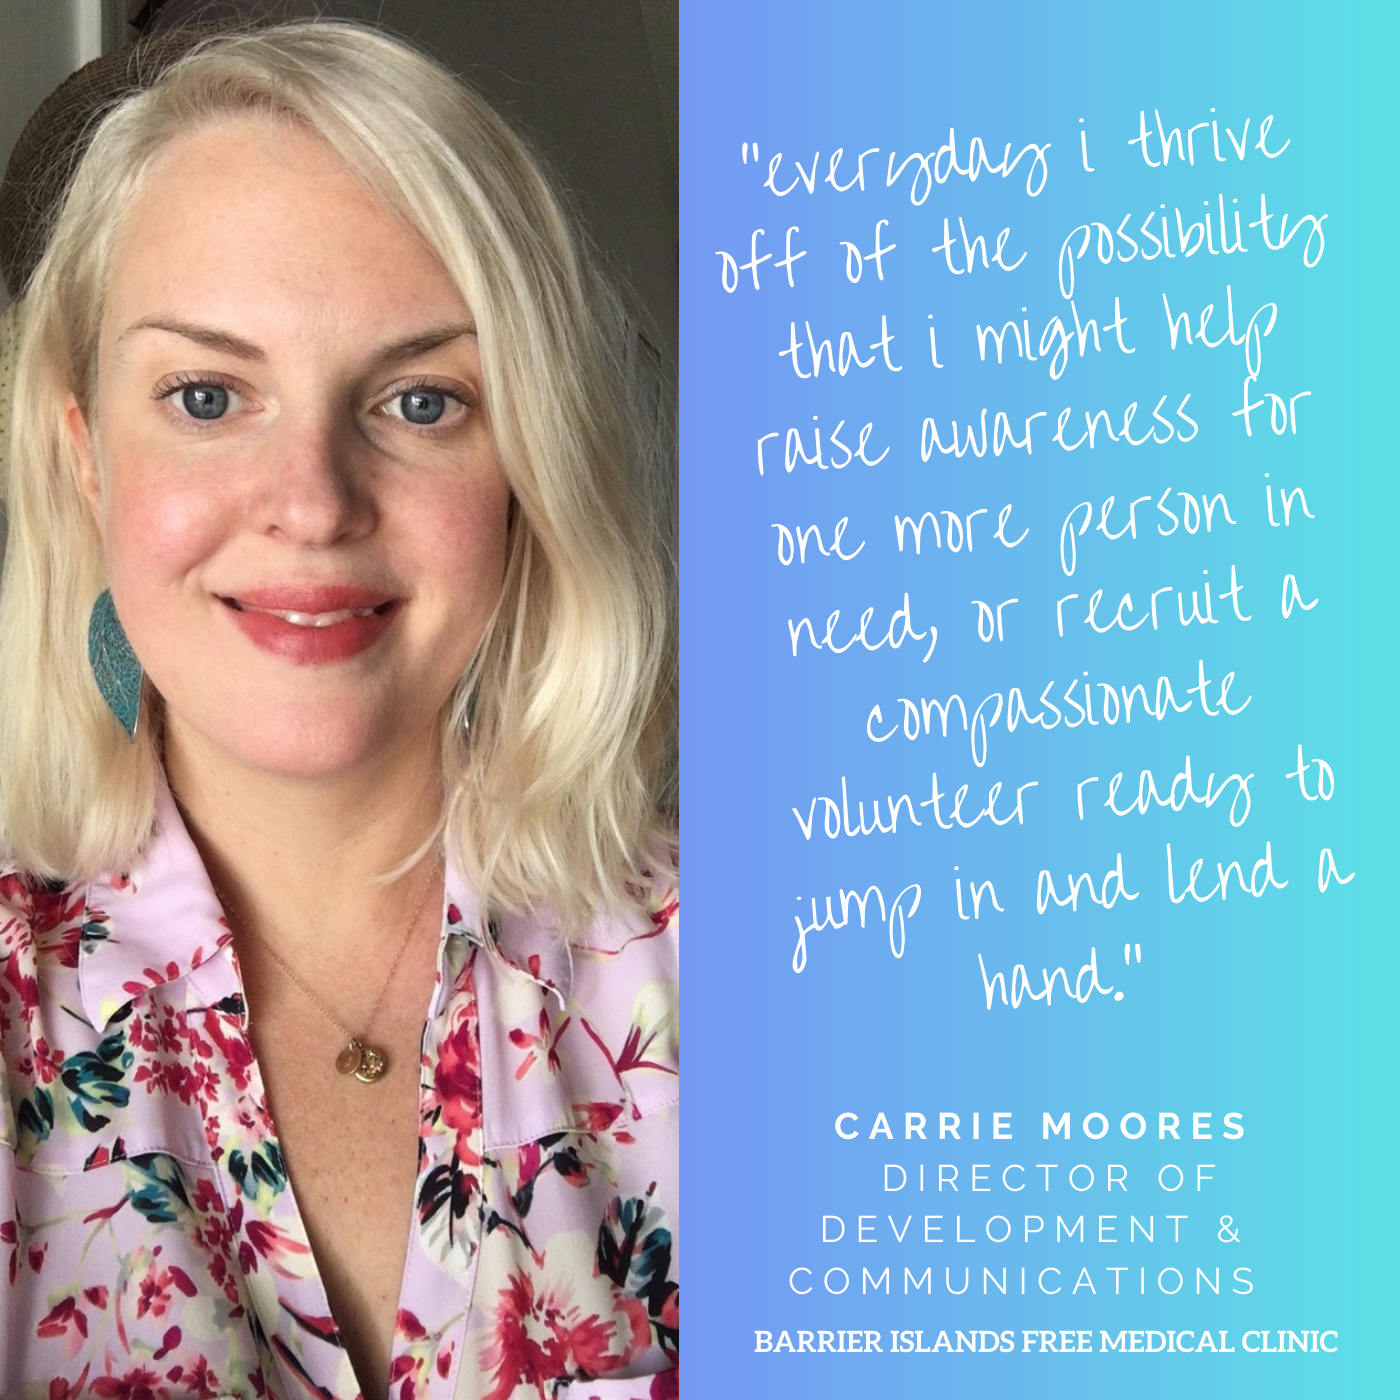 Carrie Moores, Director of Development and Communications